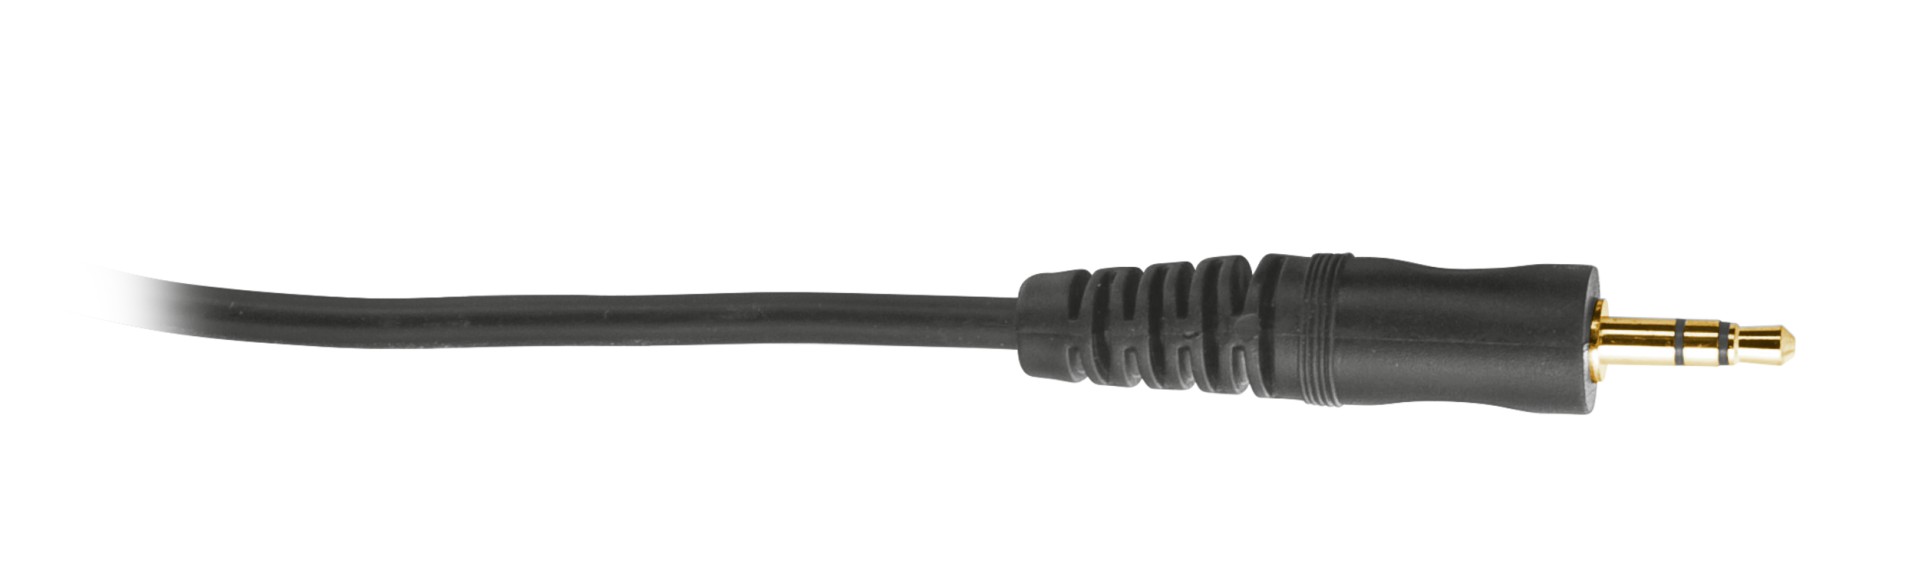 TRUST Madell wired microphone | 3.5mm